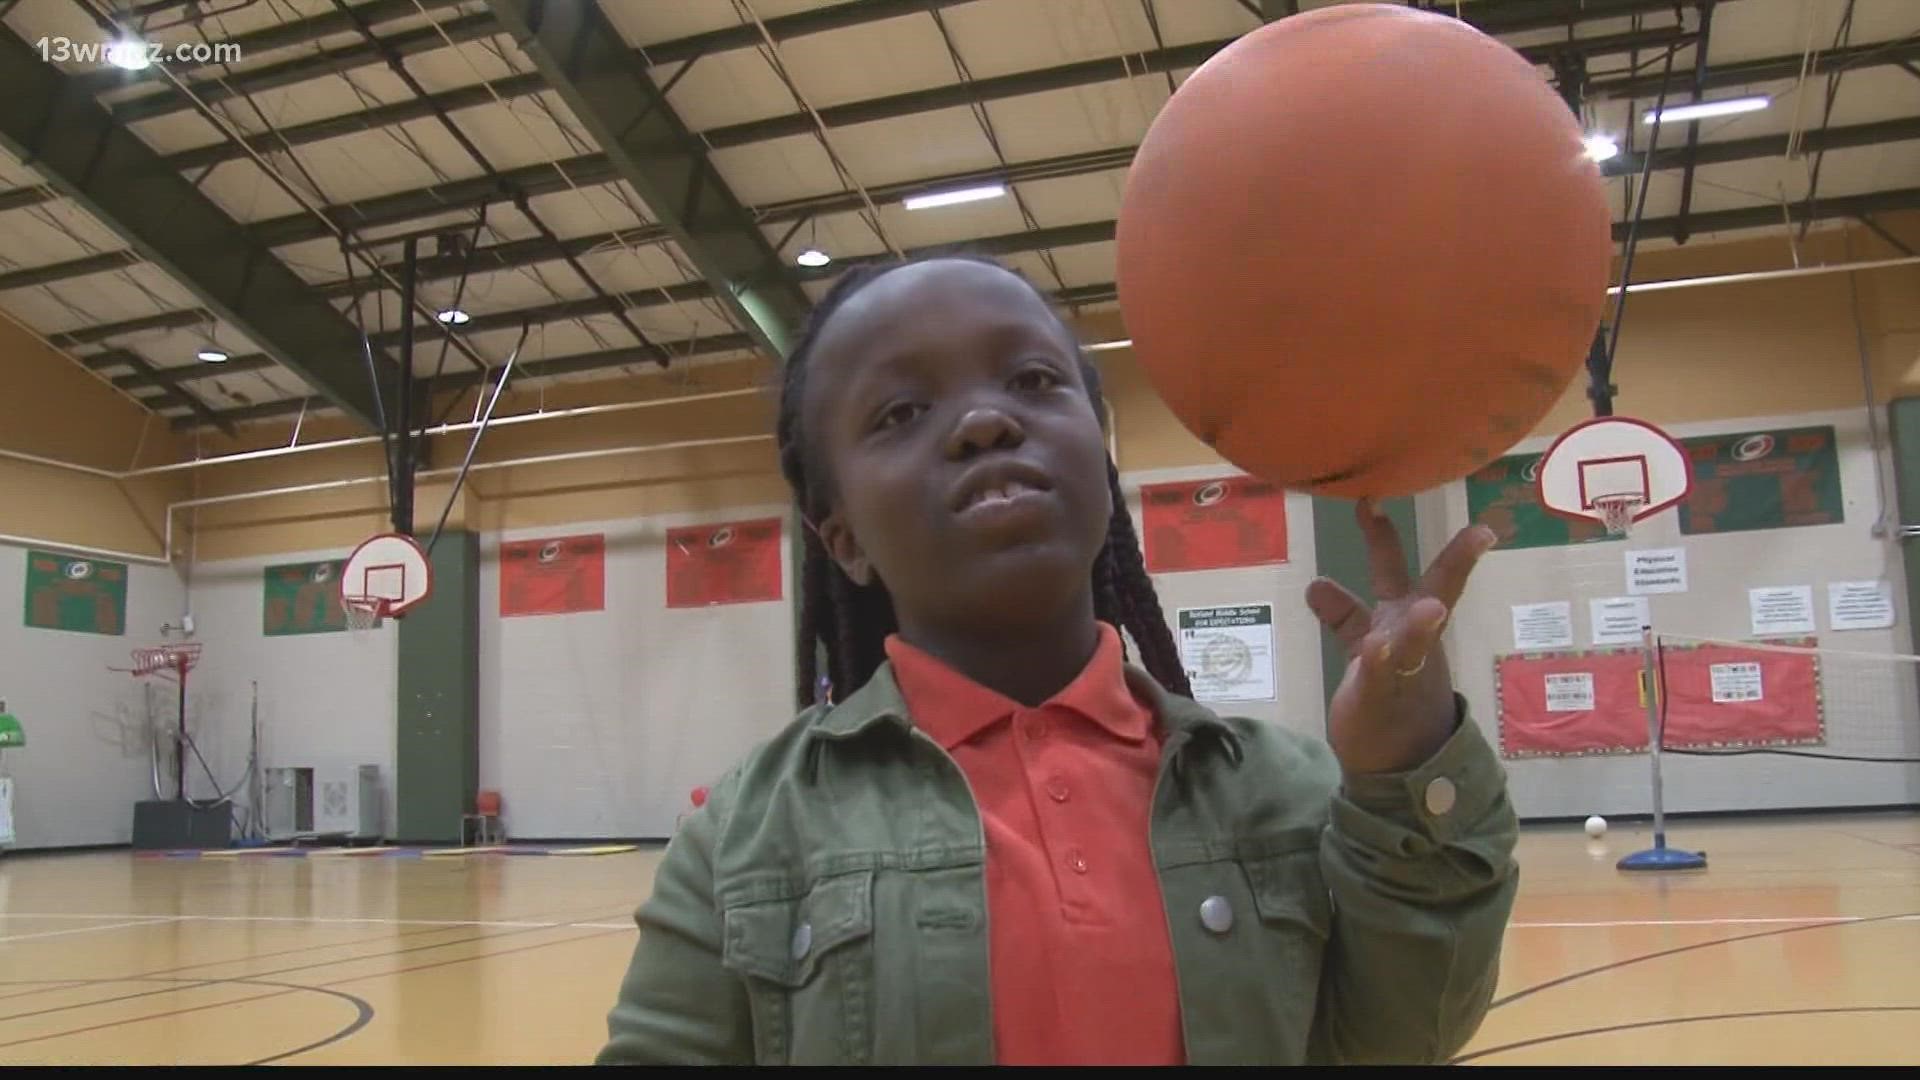 As a sixth-grader at Rutland Middle School in Macon, it's Tabrayah Woodard's first year playing organized ball on a team, and she's loving every minute of it